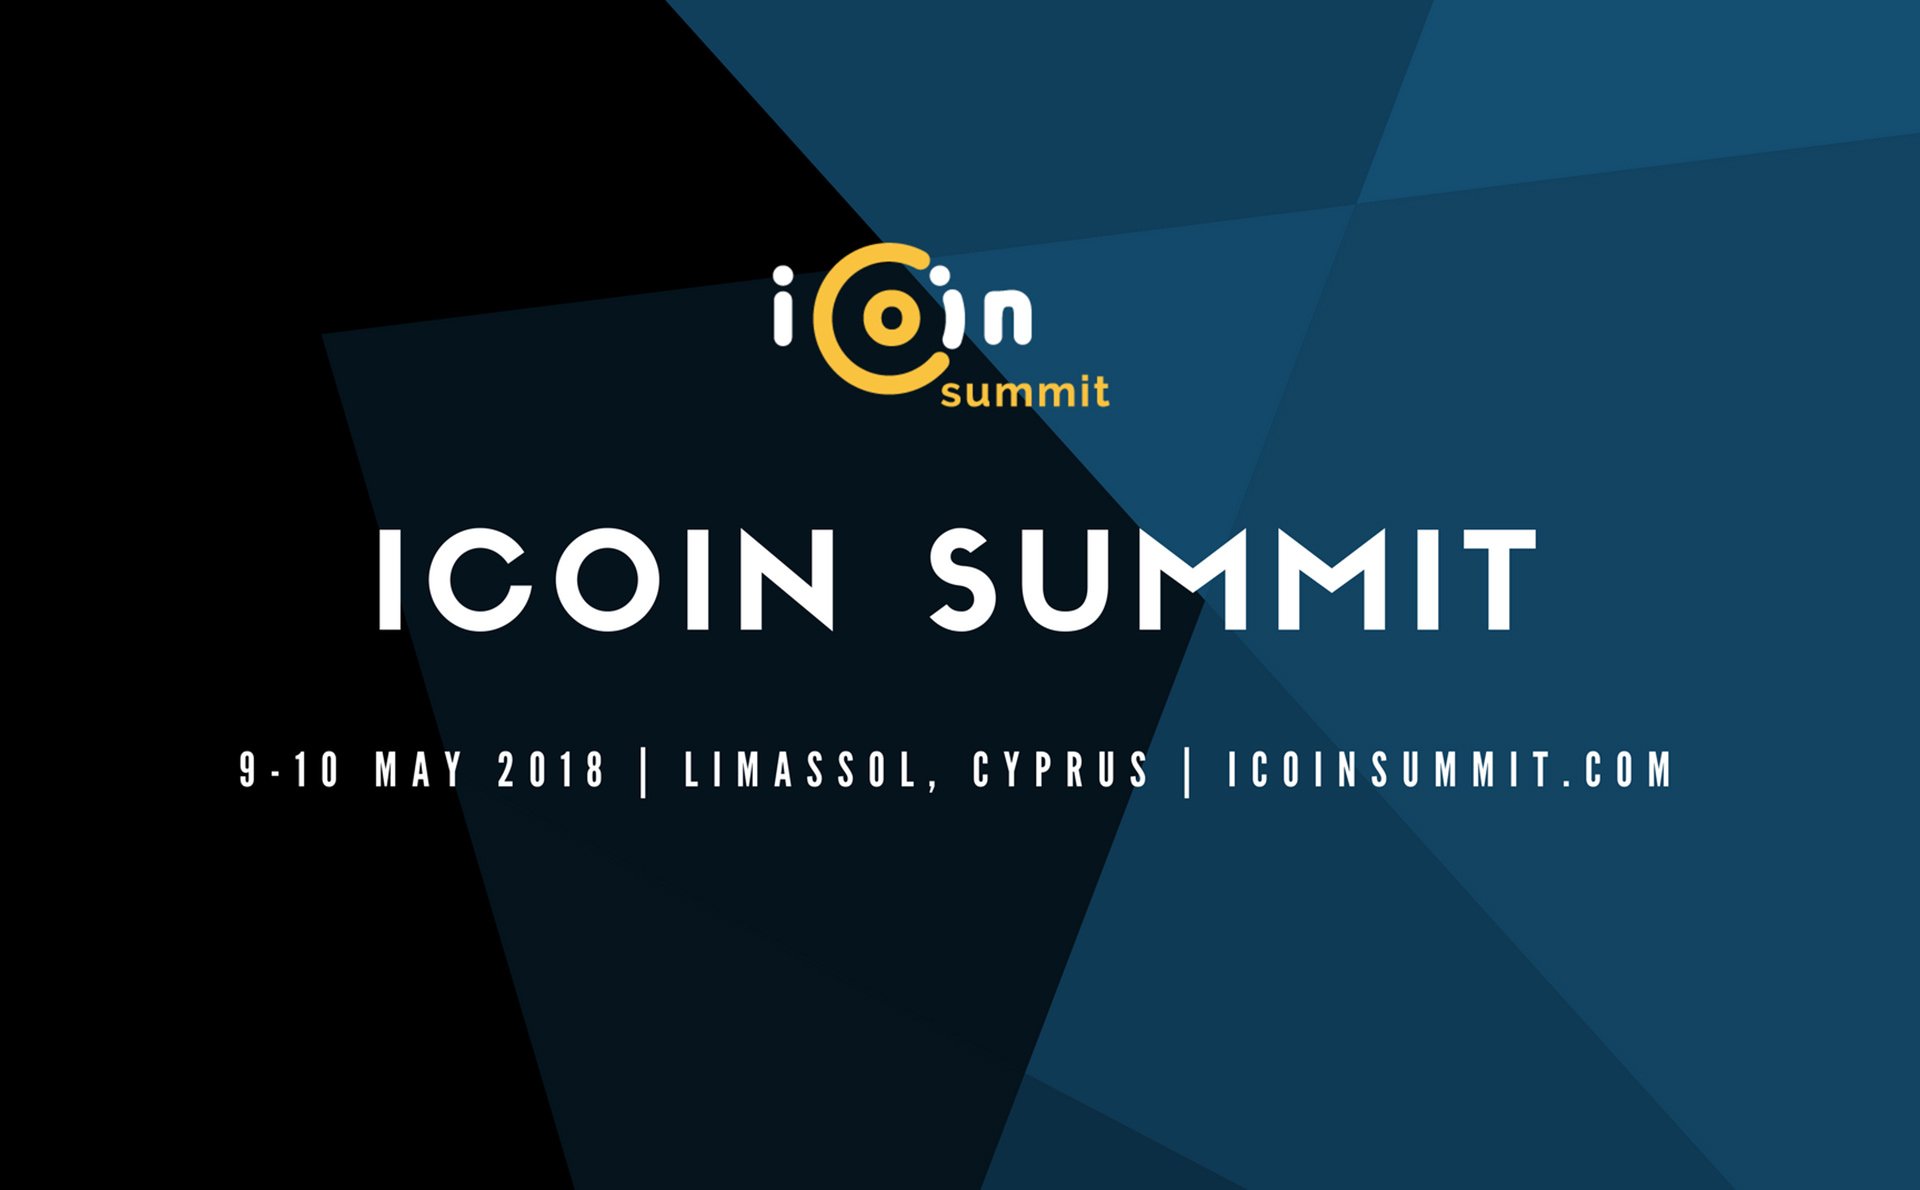 The Biggest ICO Event Heading to Cyprus – Featuring a Stellar Line Up of Speakers and the First Ever ICO Battle with a Live Prize